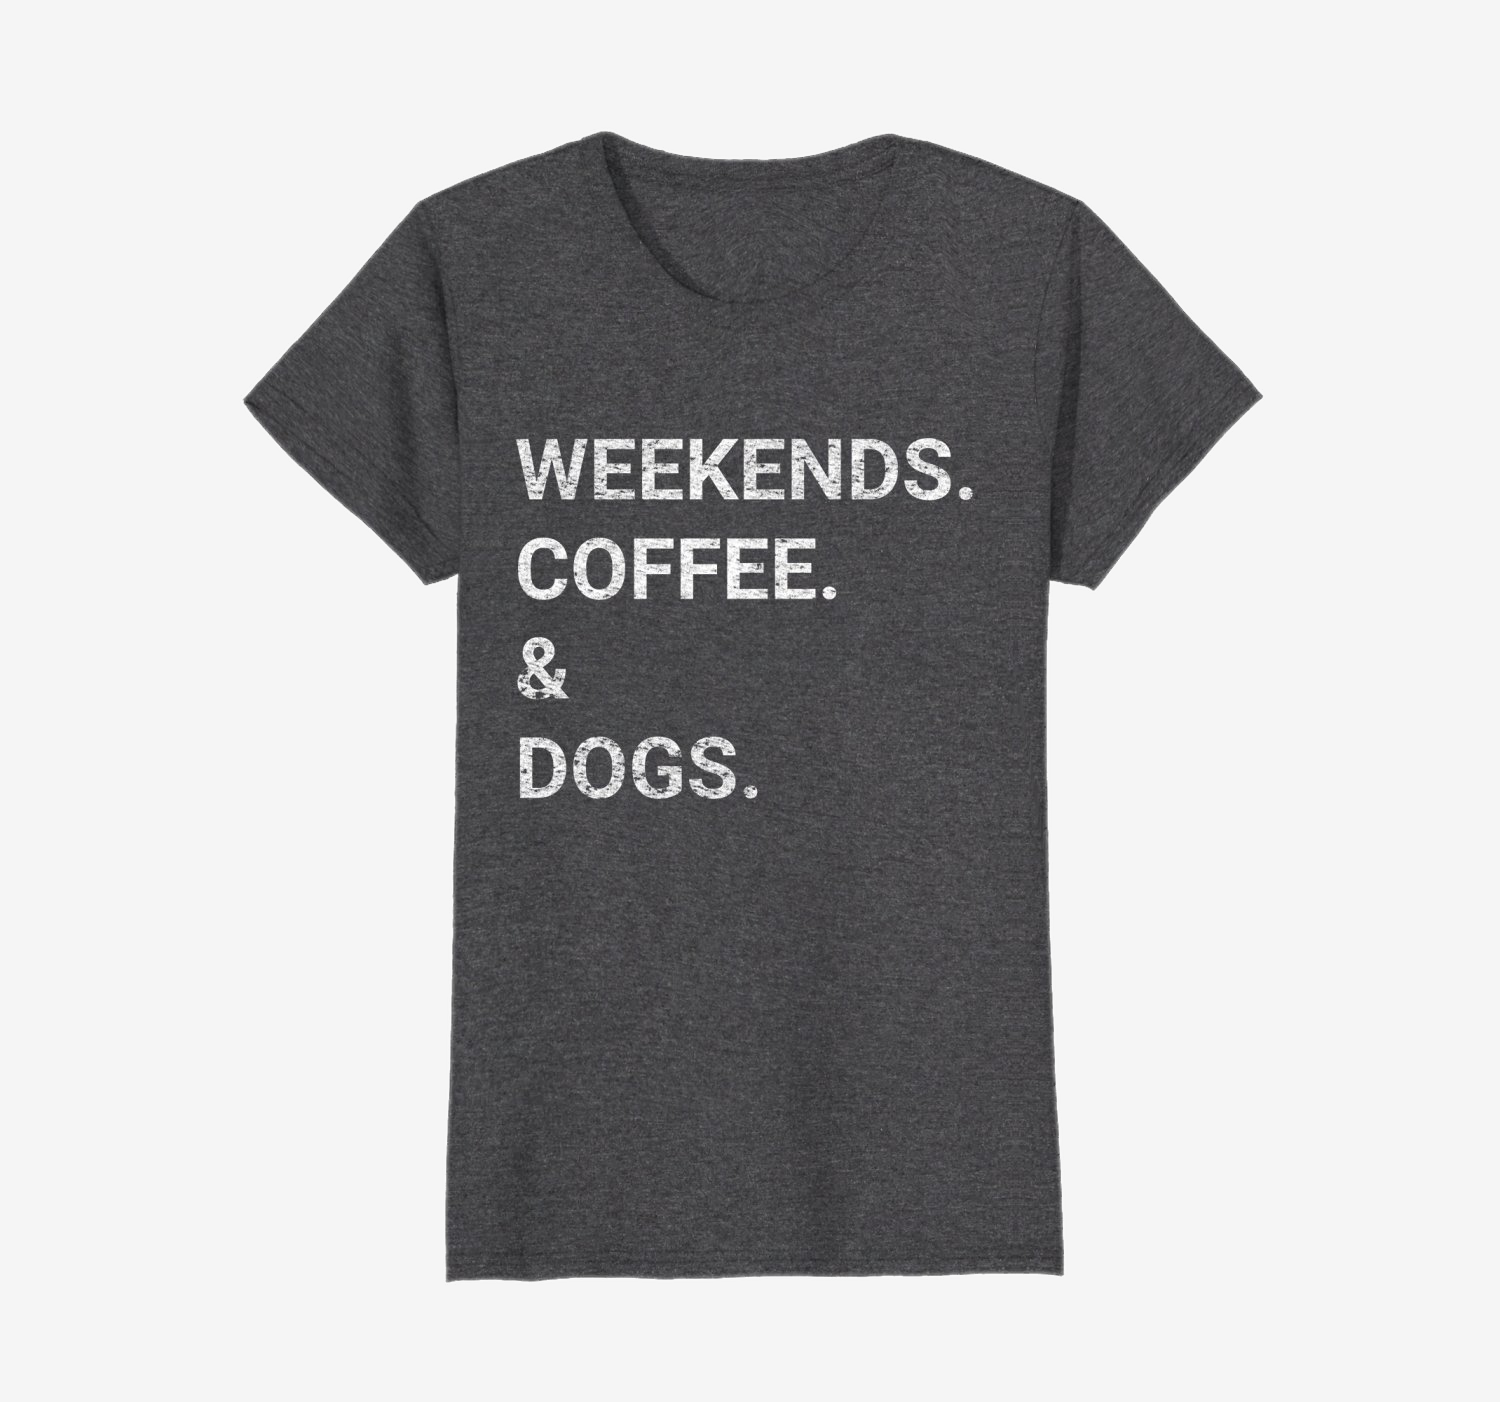 Funny Dog Shirt for Dog Lovers gifts 2018 - 2022